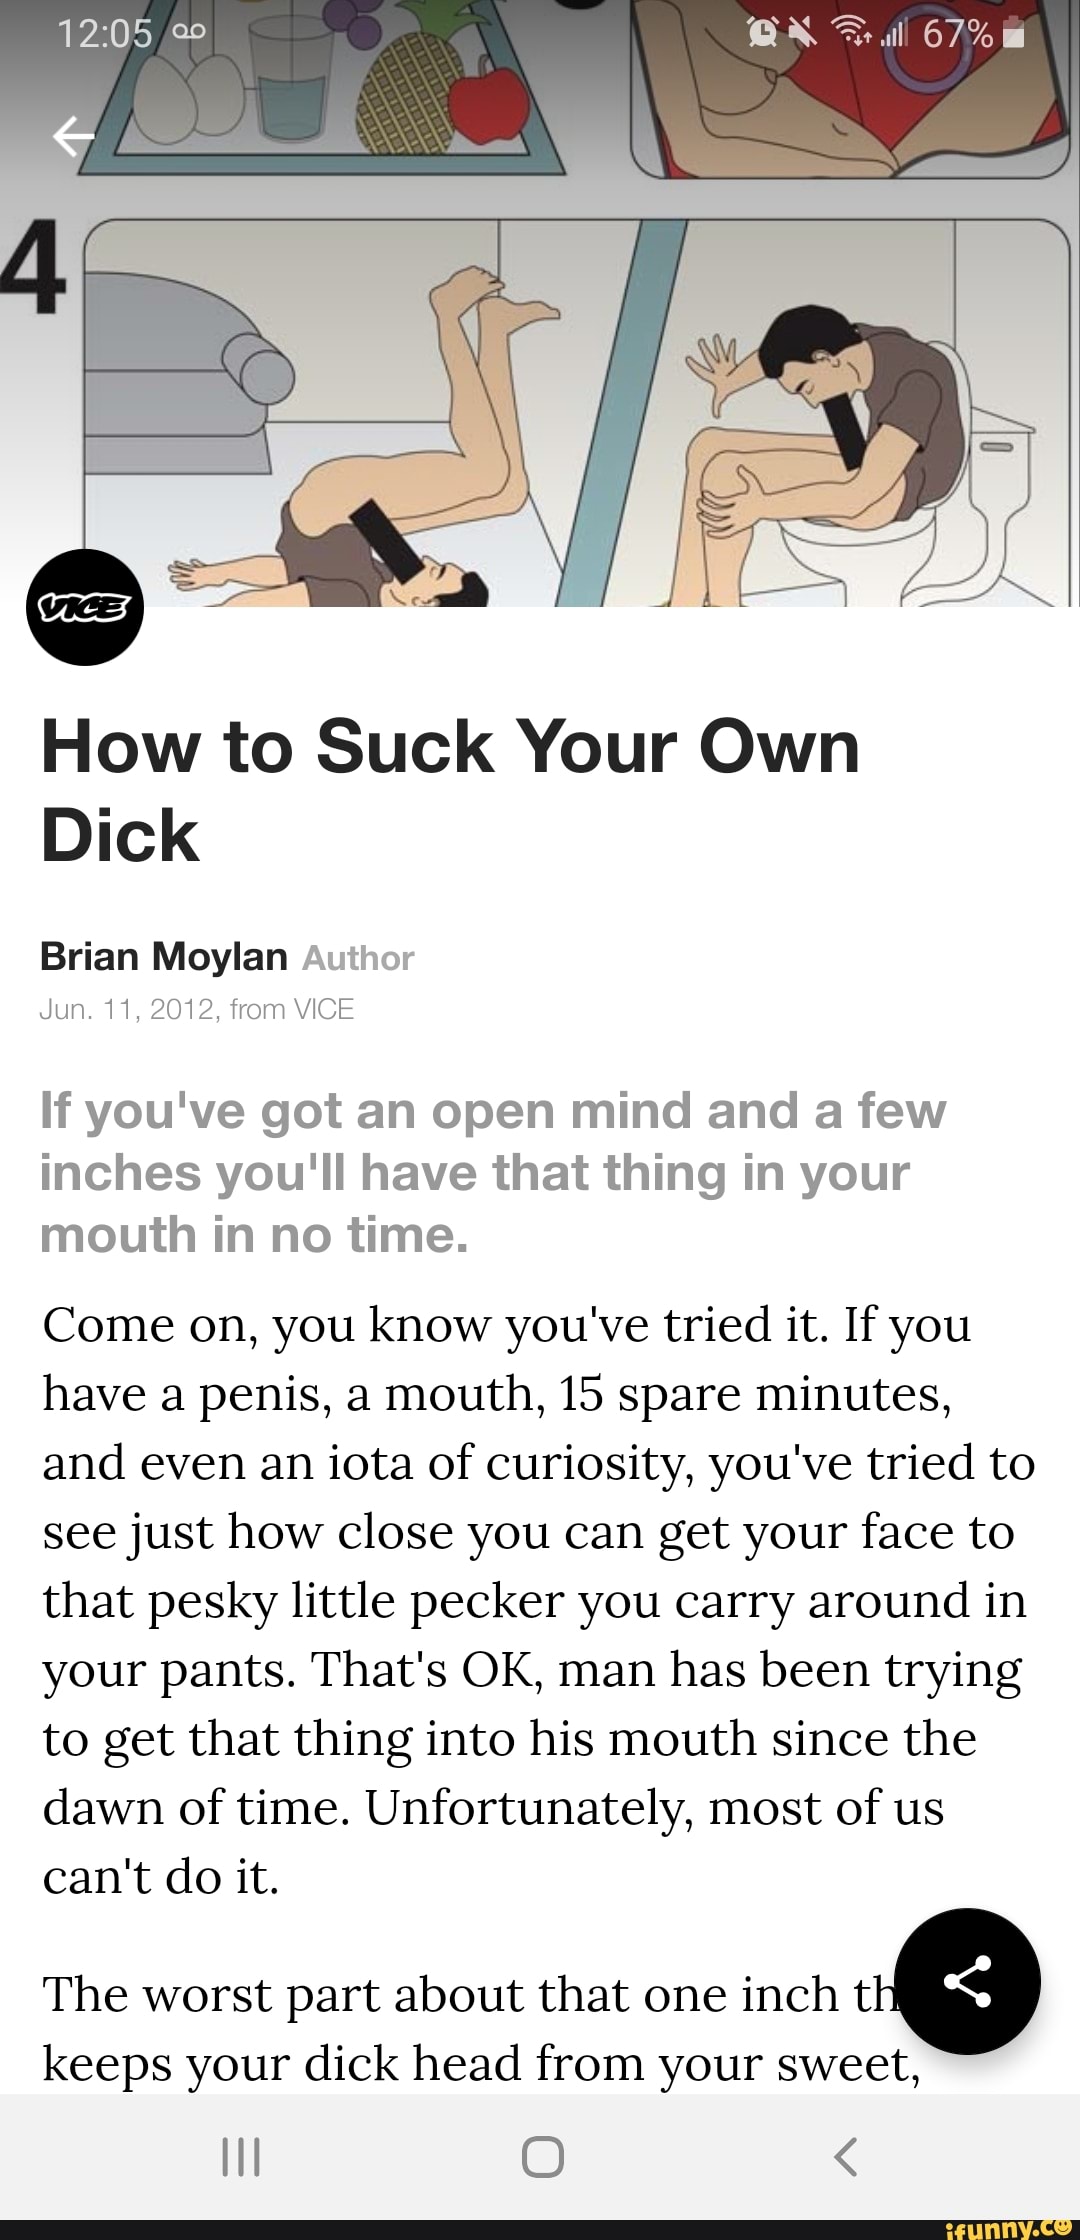 How to suck your own dick.